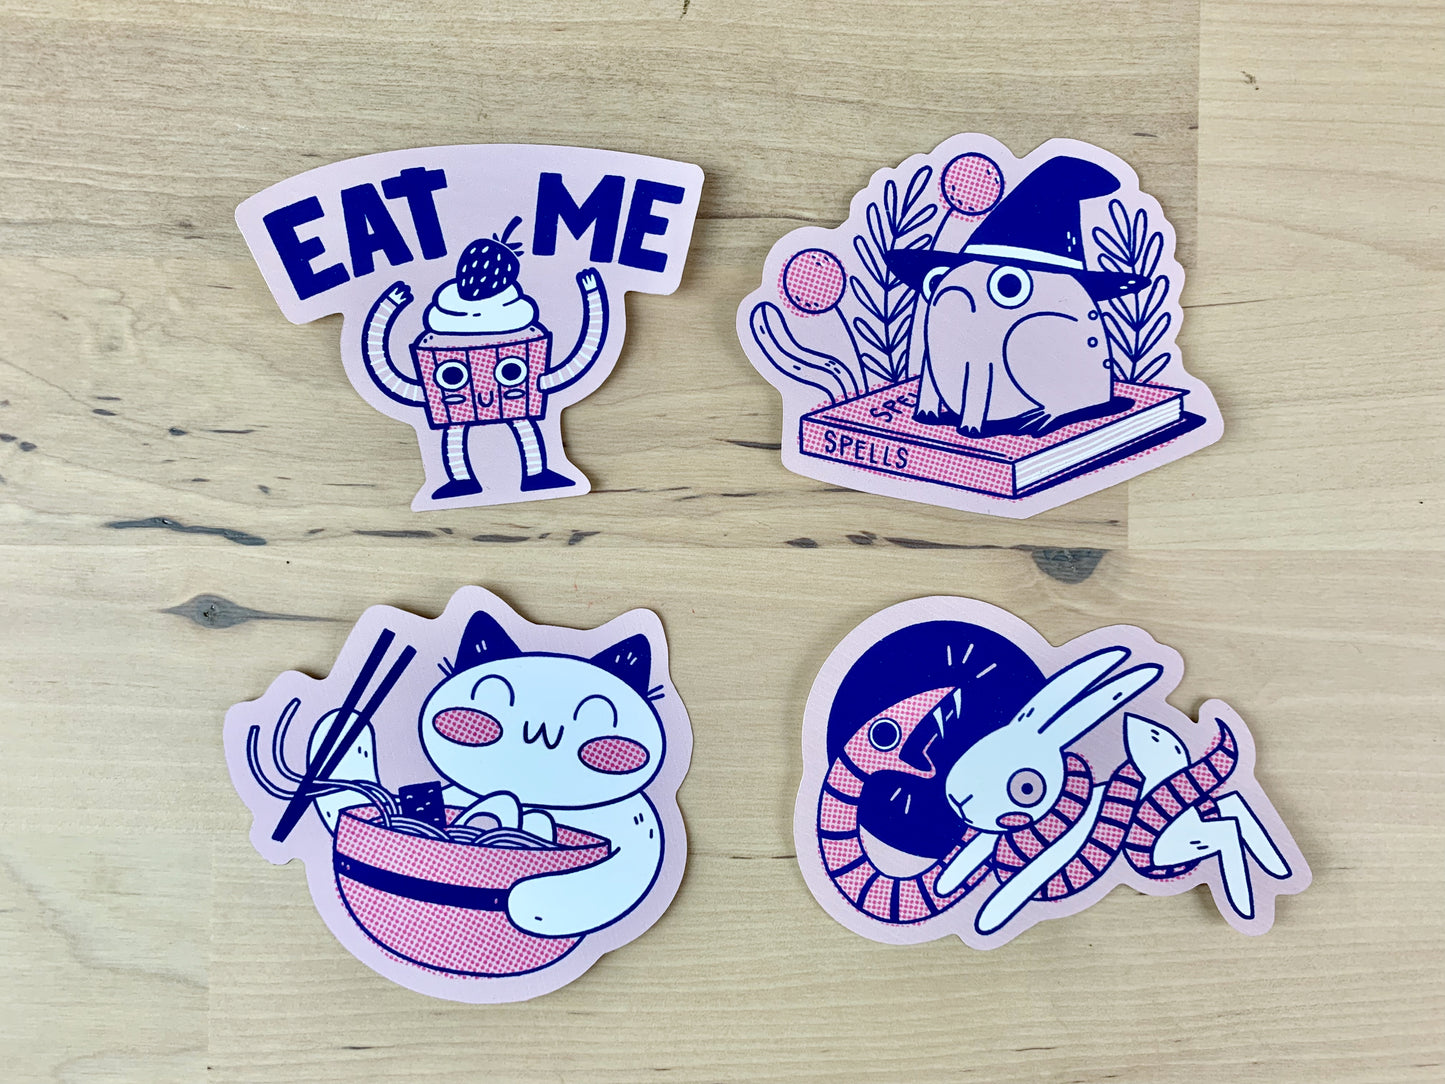 Collection of stickers: Anthropomorphic cupcake with the words "Eat me" above it, a frog wearing a witches hat sitting on top of a book of spells, a lucky cat eating ramen with chopsticks, and a snake wrapping itself around a scared hare/rabbit.